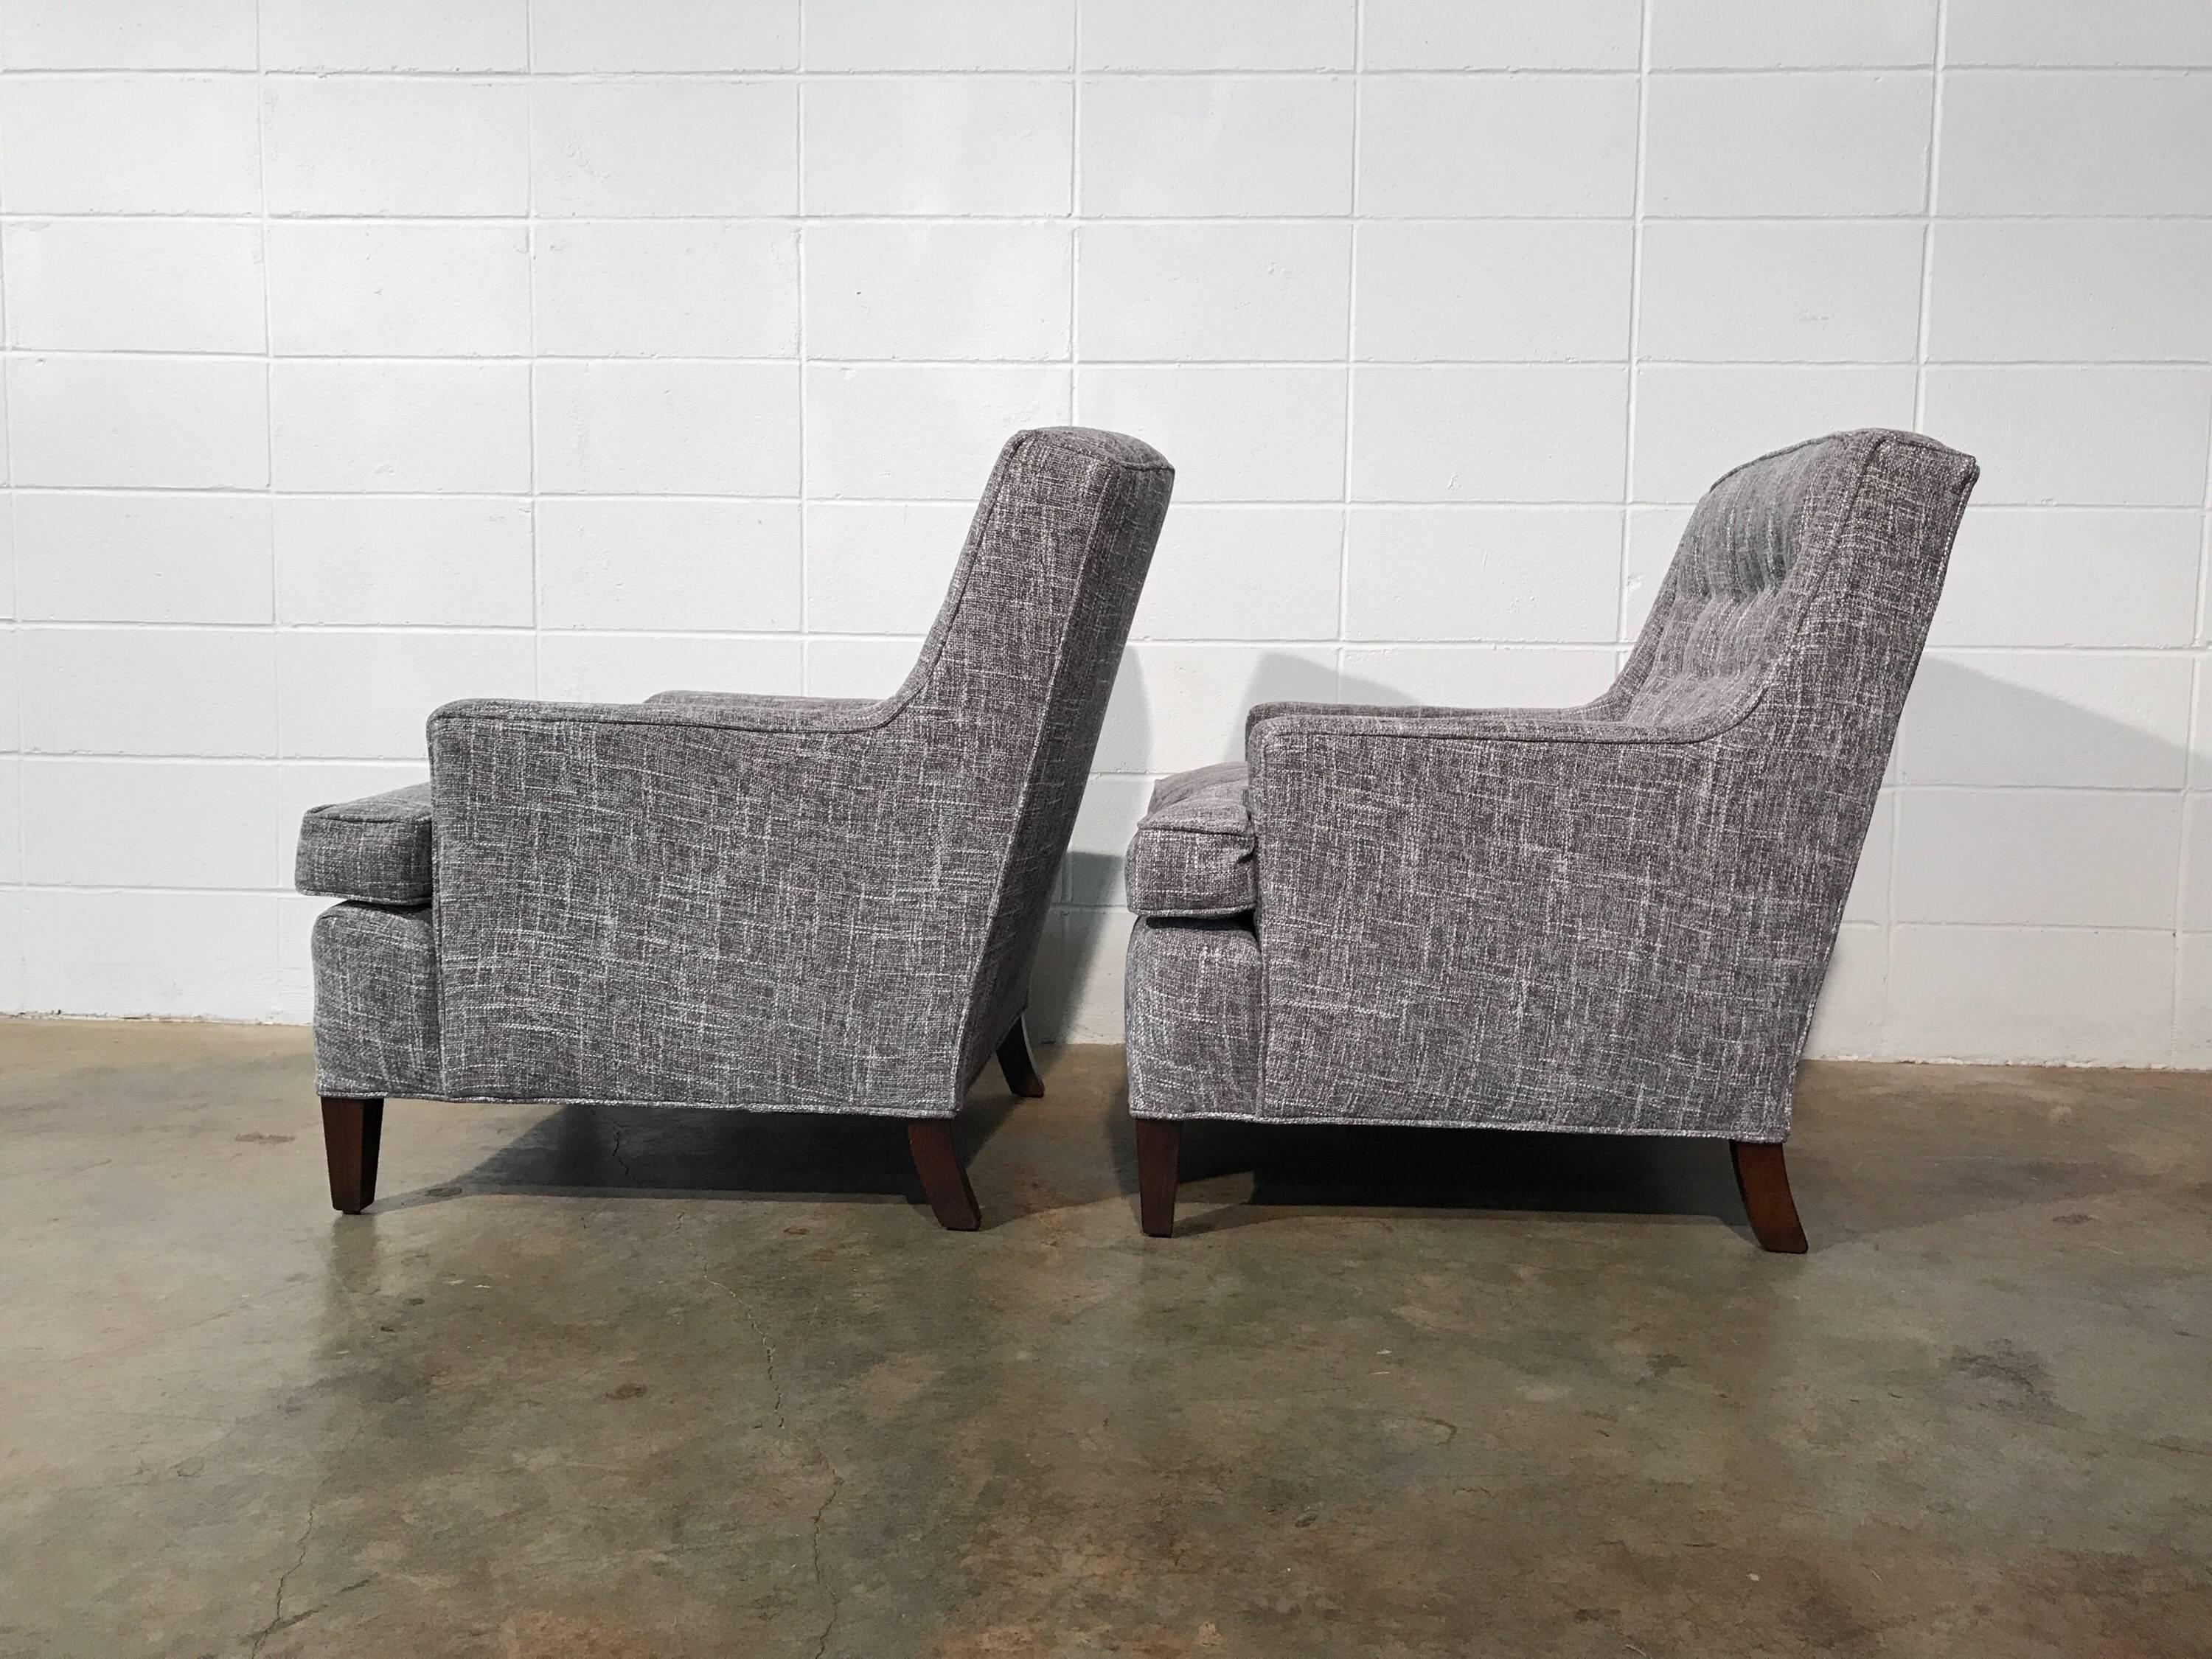 American Pair of Restored Mid-Century Modern Lounge Chairs, Gray Upholstery